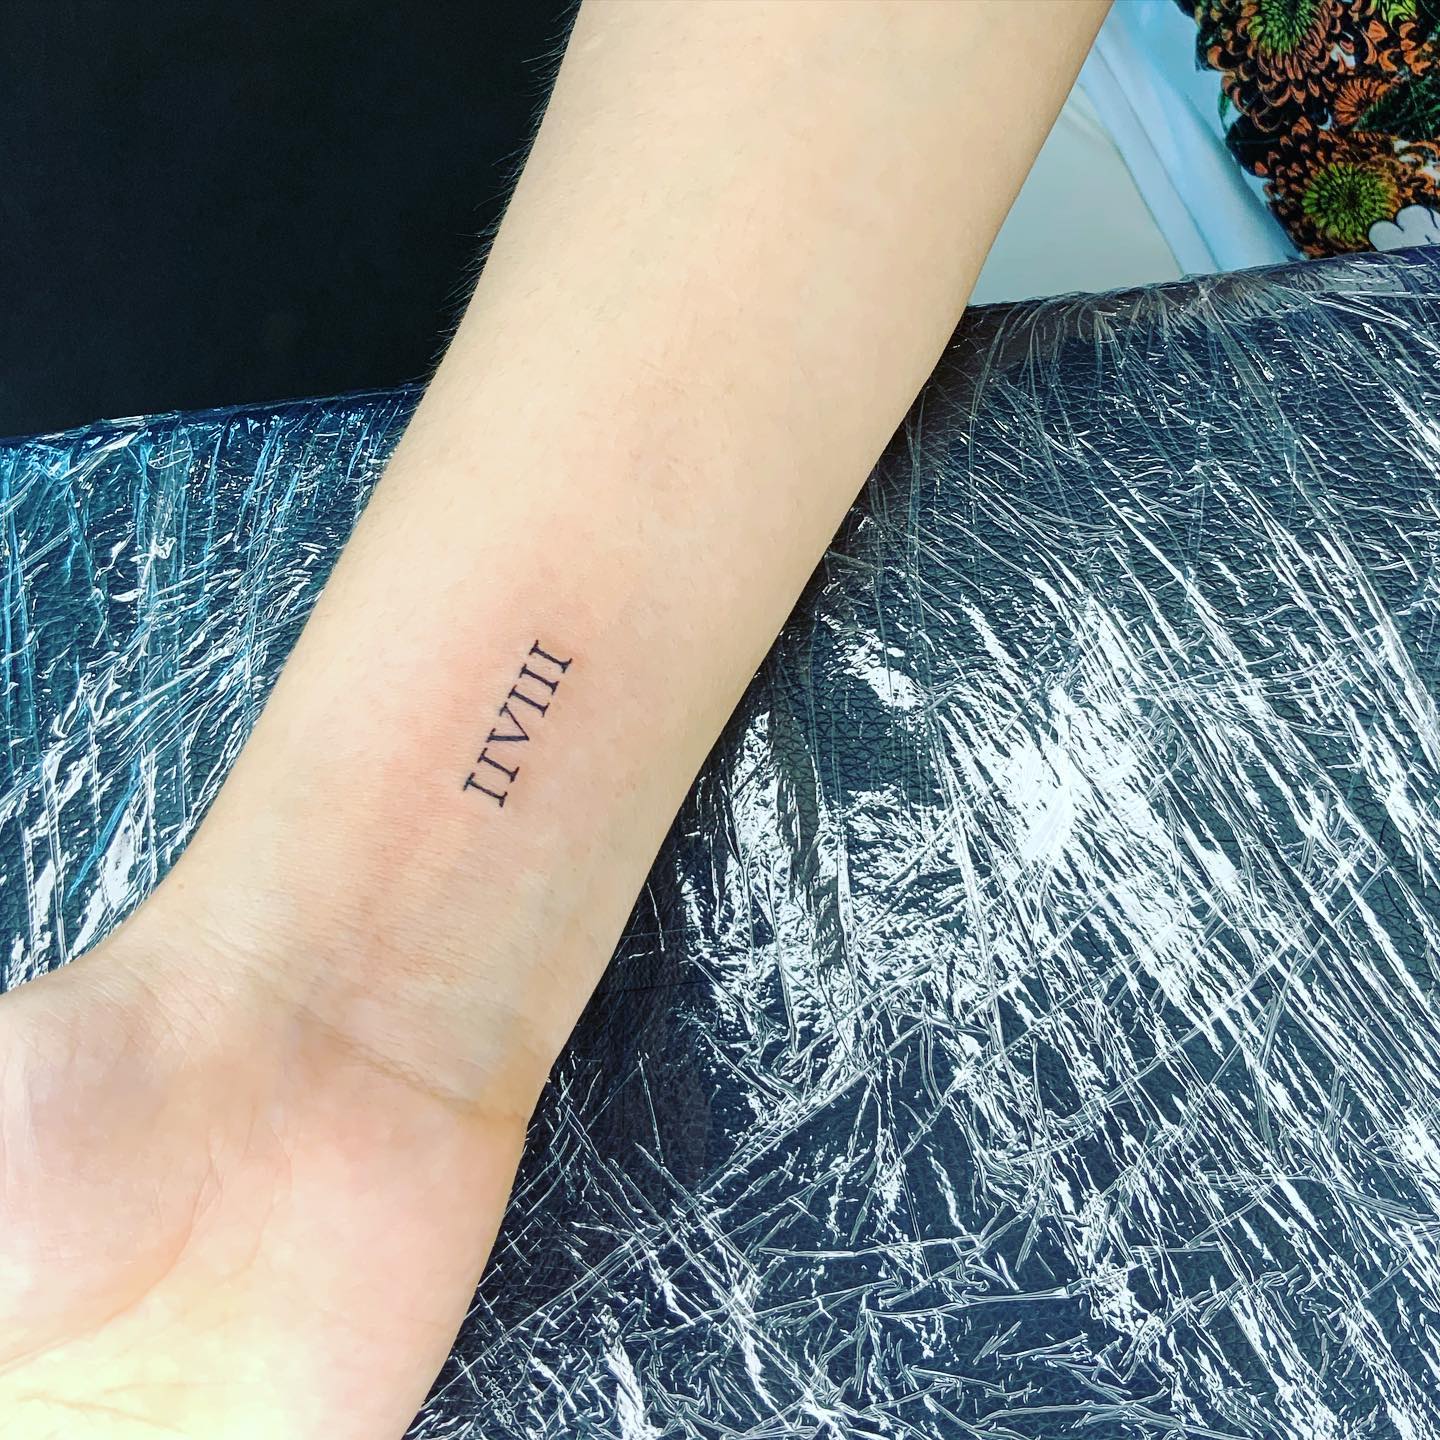 10 Best Roman Numerals Tattoo Wrist Ideas That Will Blow Your Mind   Outsons